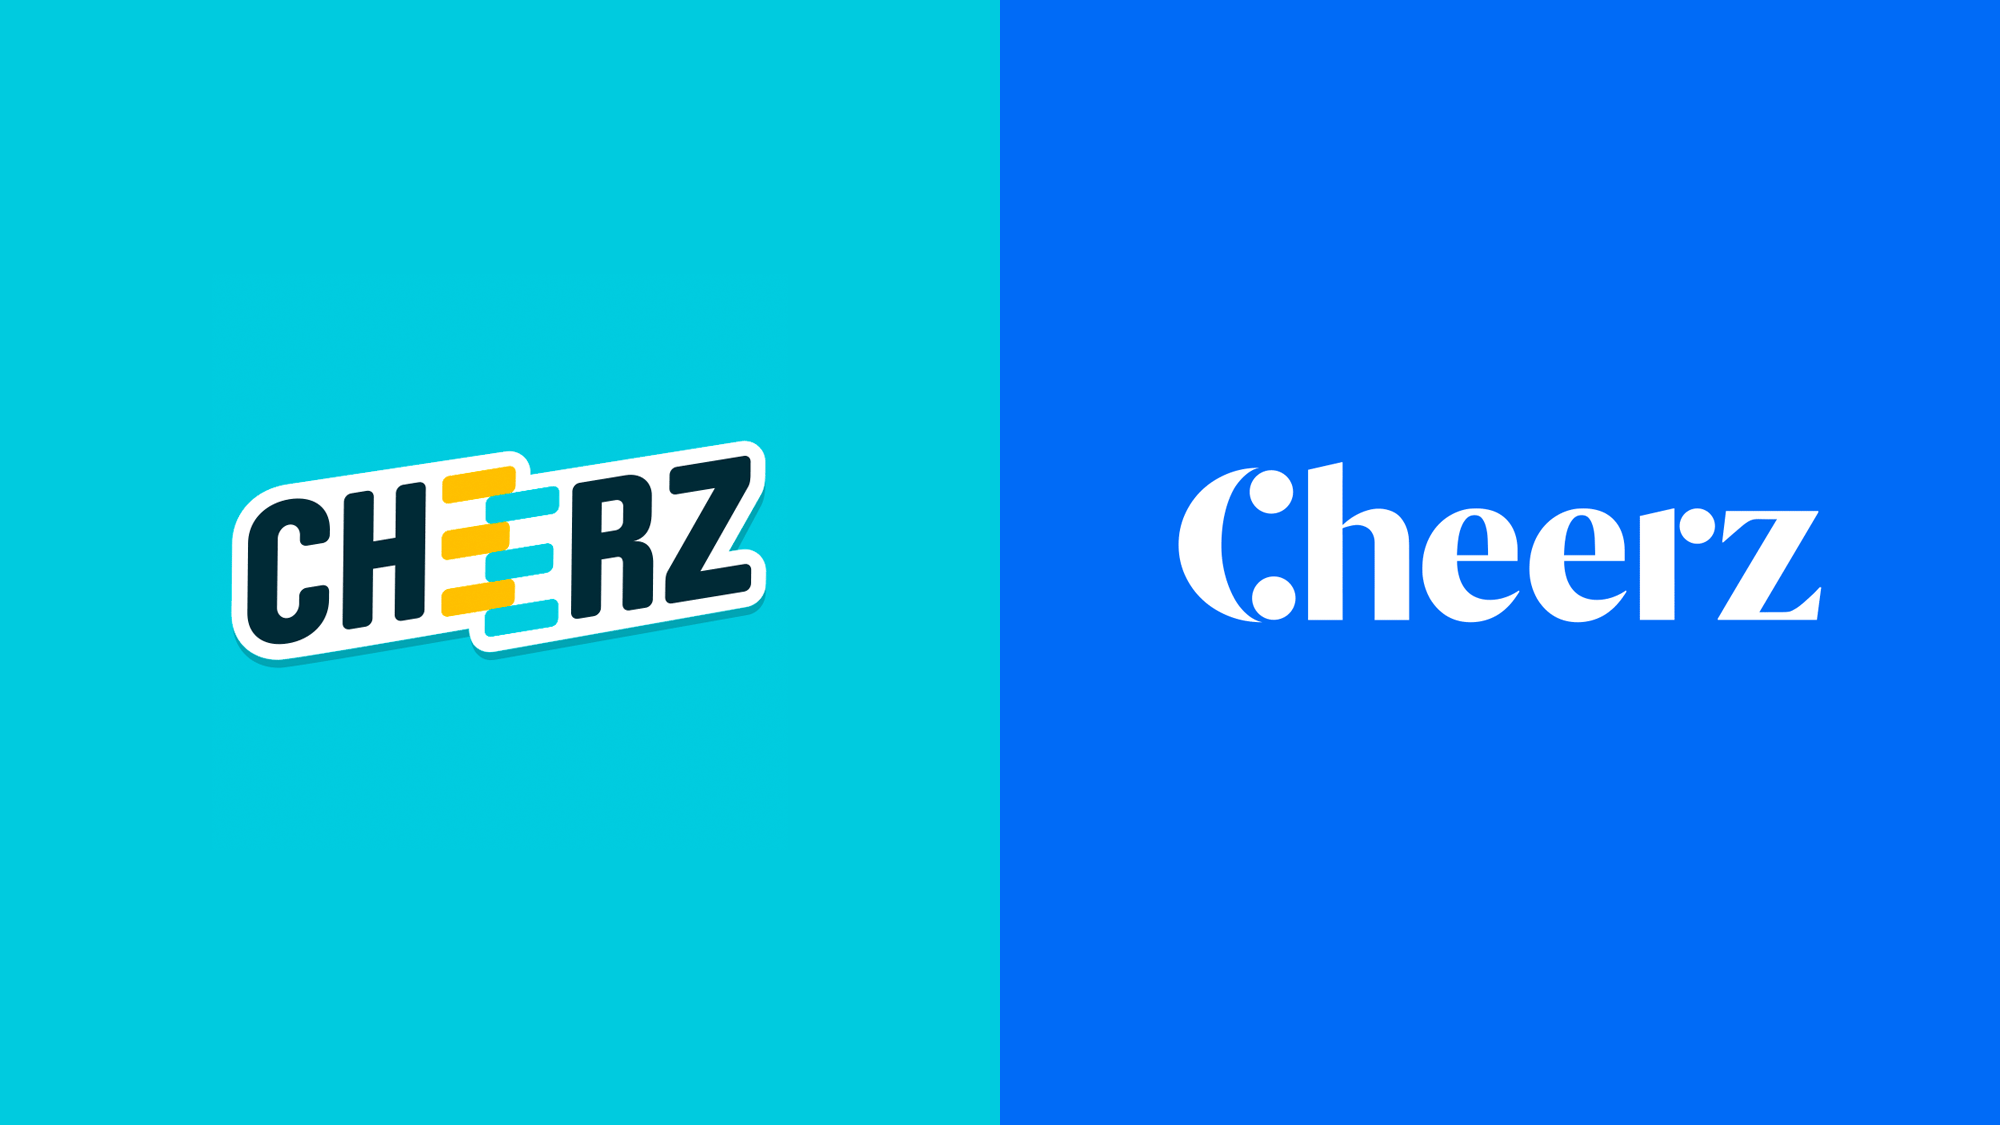 Brand New: New Logo and Identity for Cheerz by LaPetiteGrosse